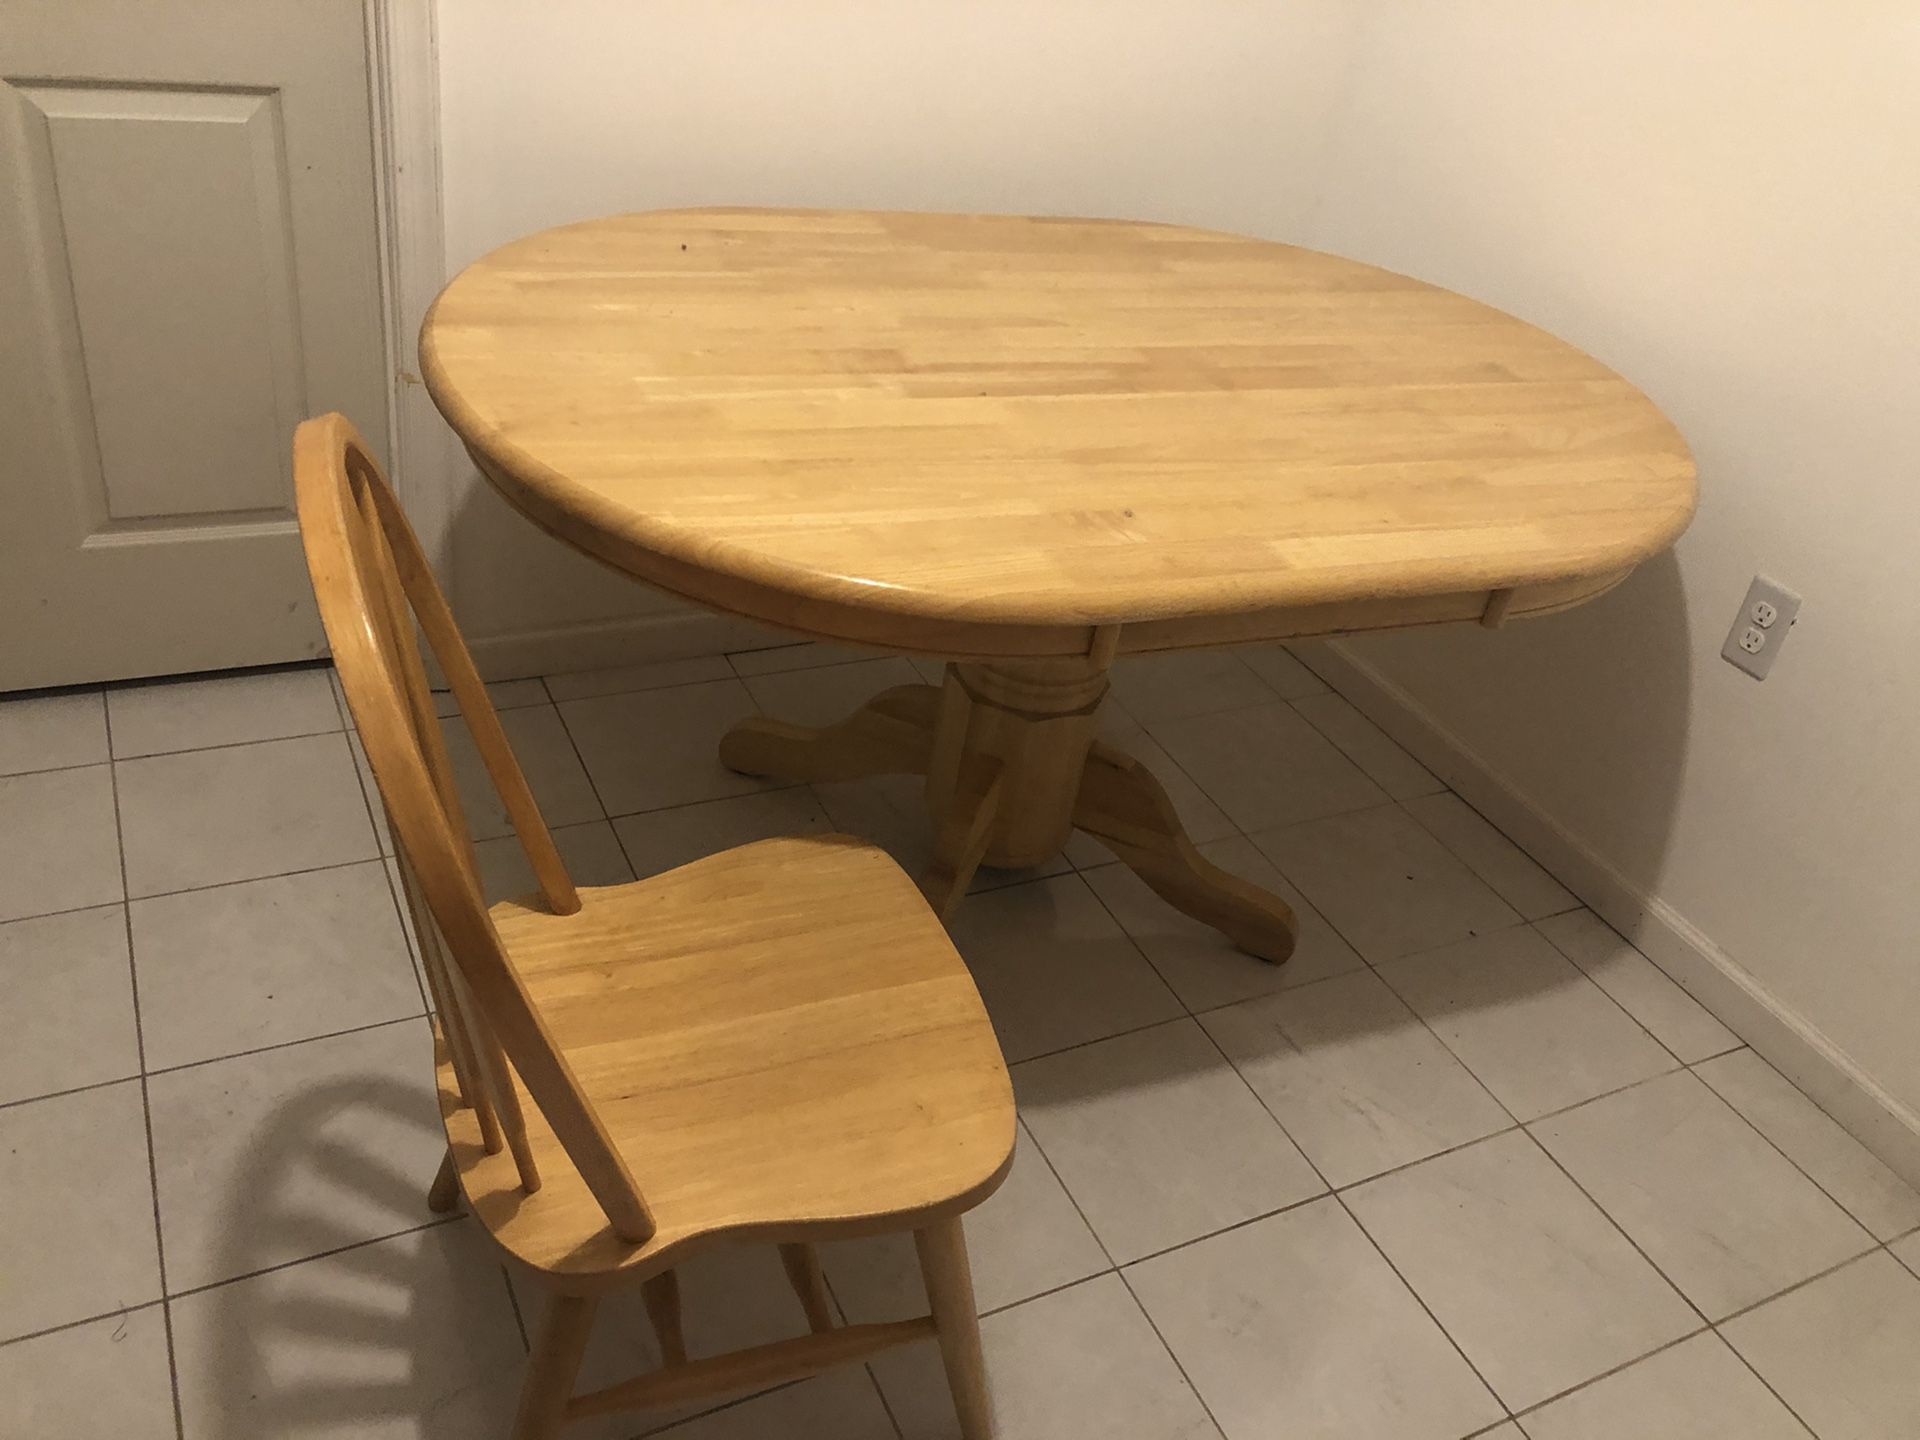 Dining table and 4 chairs for $180